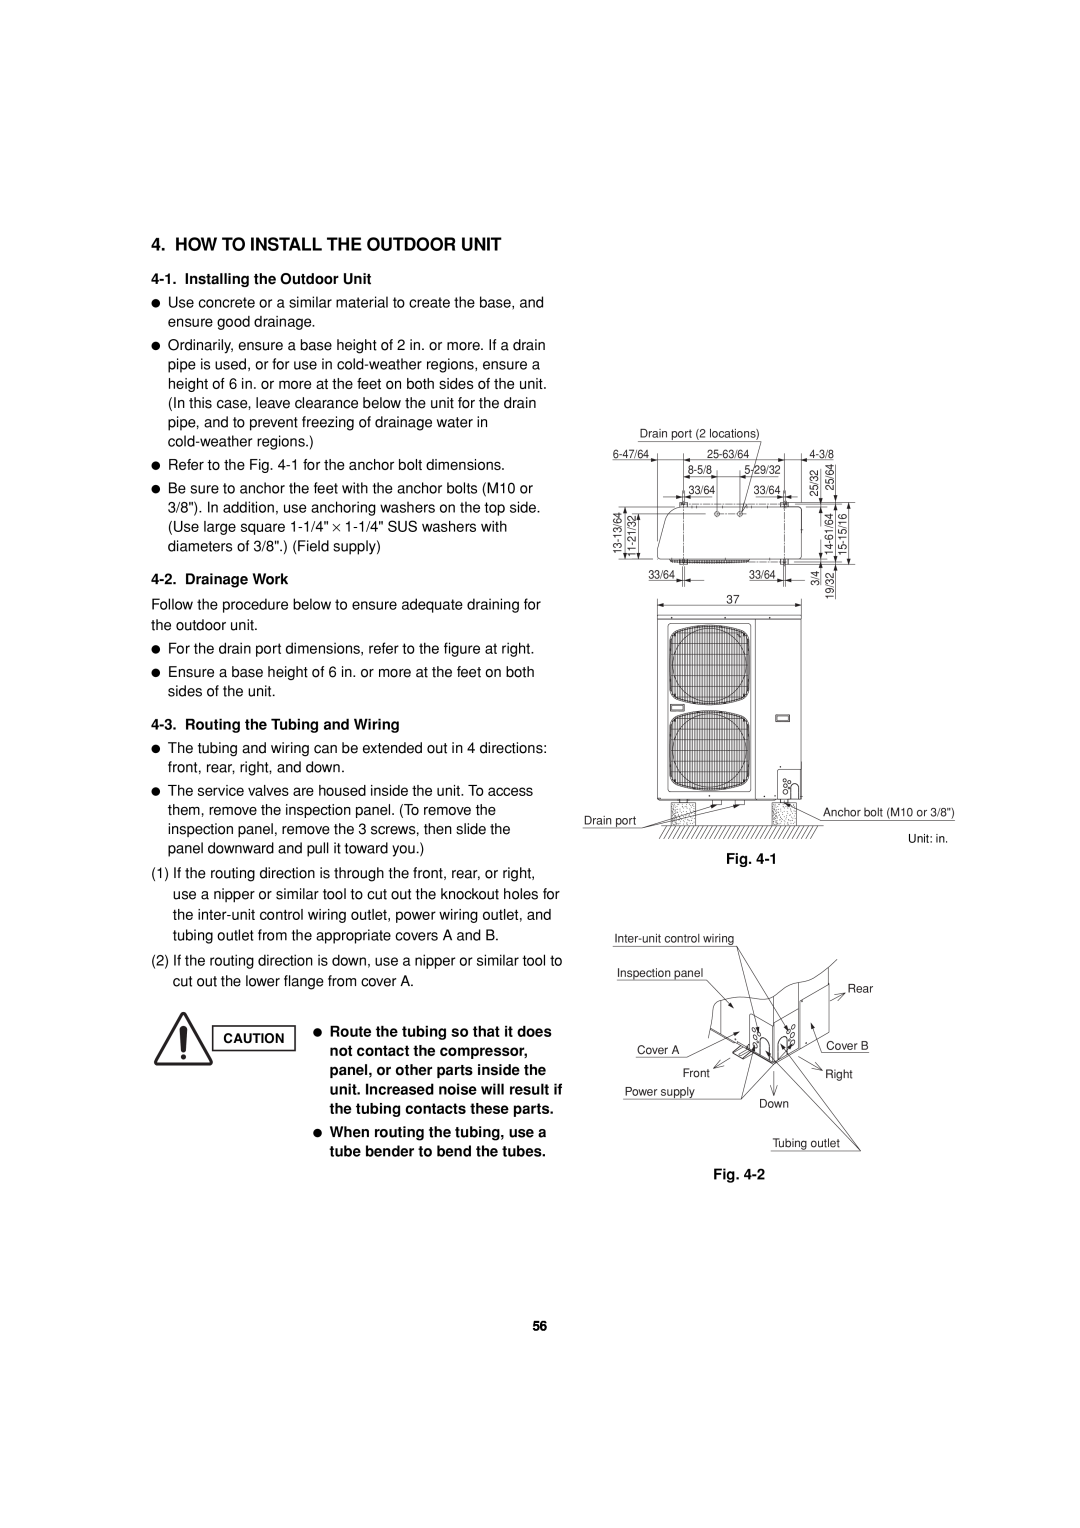 Sanyo 85464359981002 How To Install The Outdoor Unit, Installing the Outdoor Unit, Drainage Work, Fig 